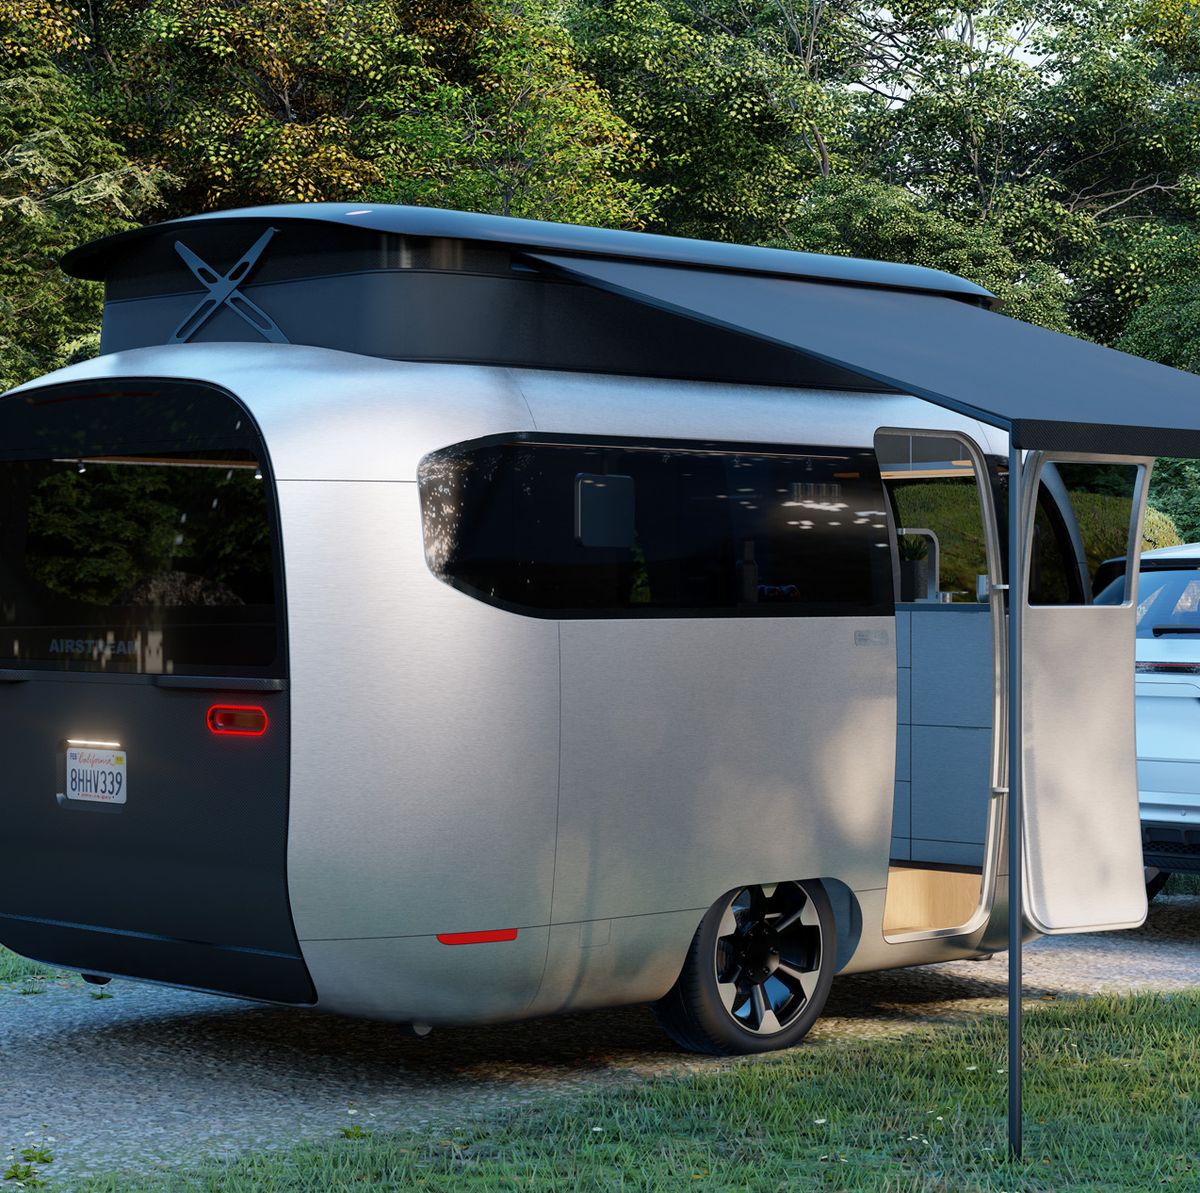 Airstream and Studio . Porsche Reveal the Camping Trailer of the Future